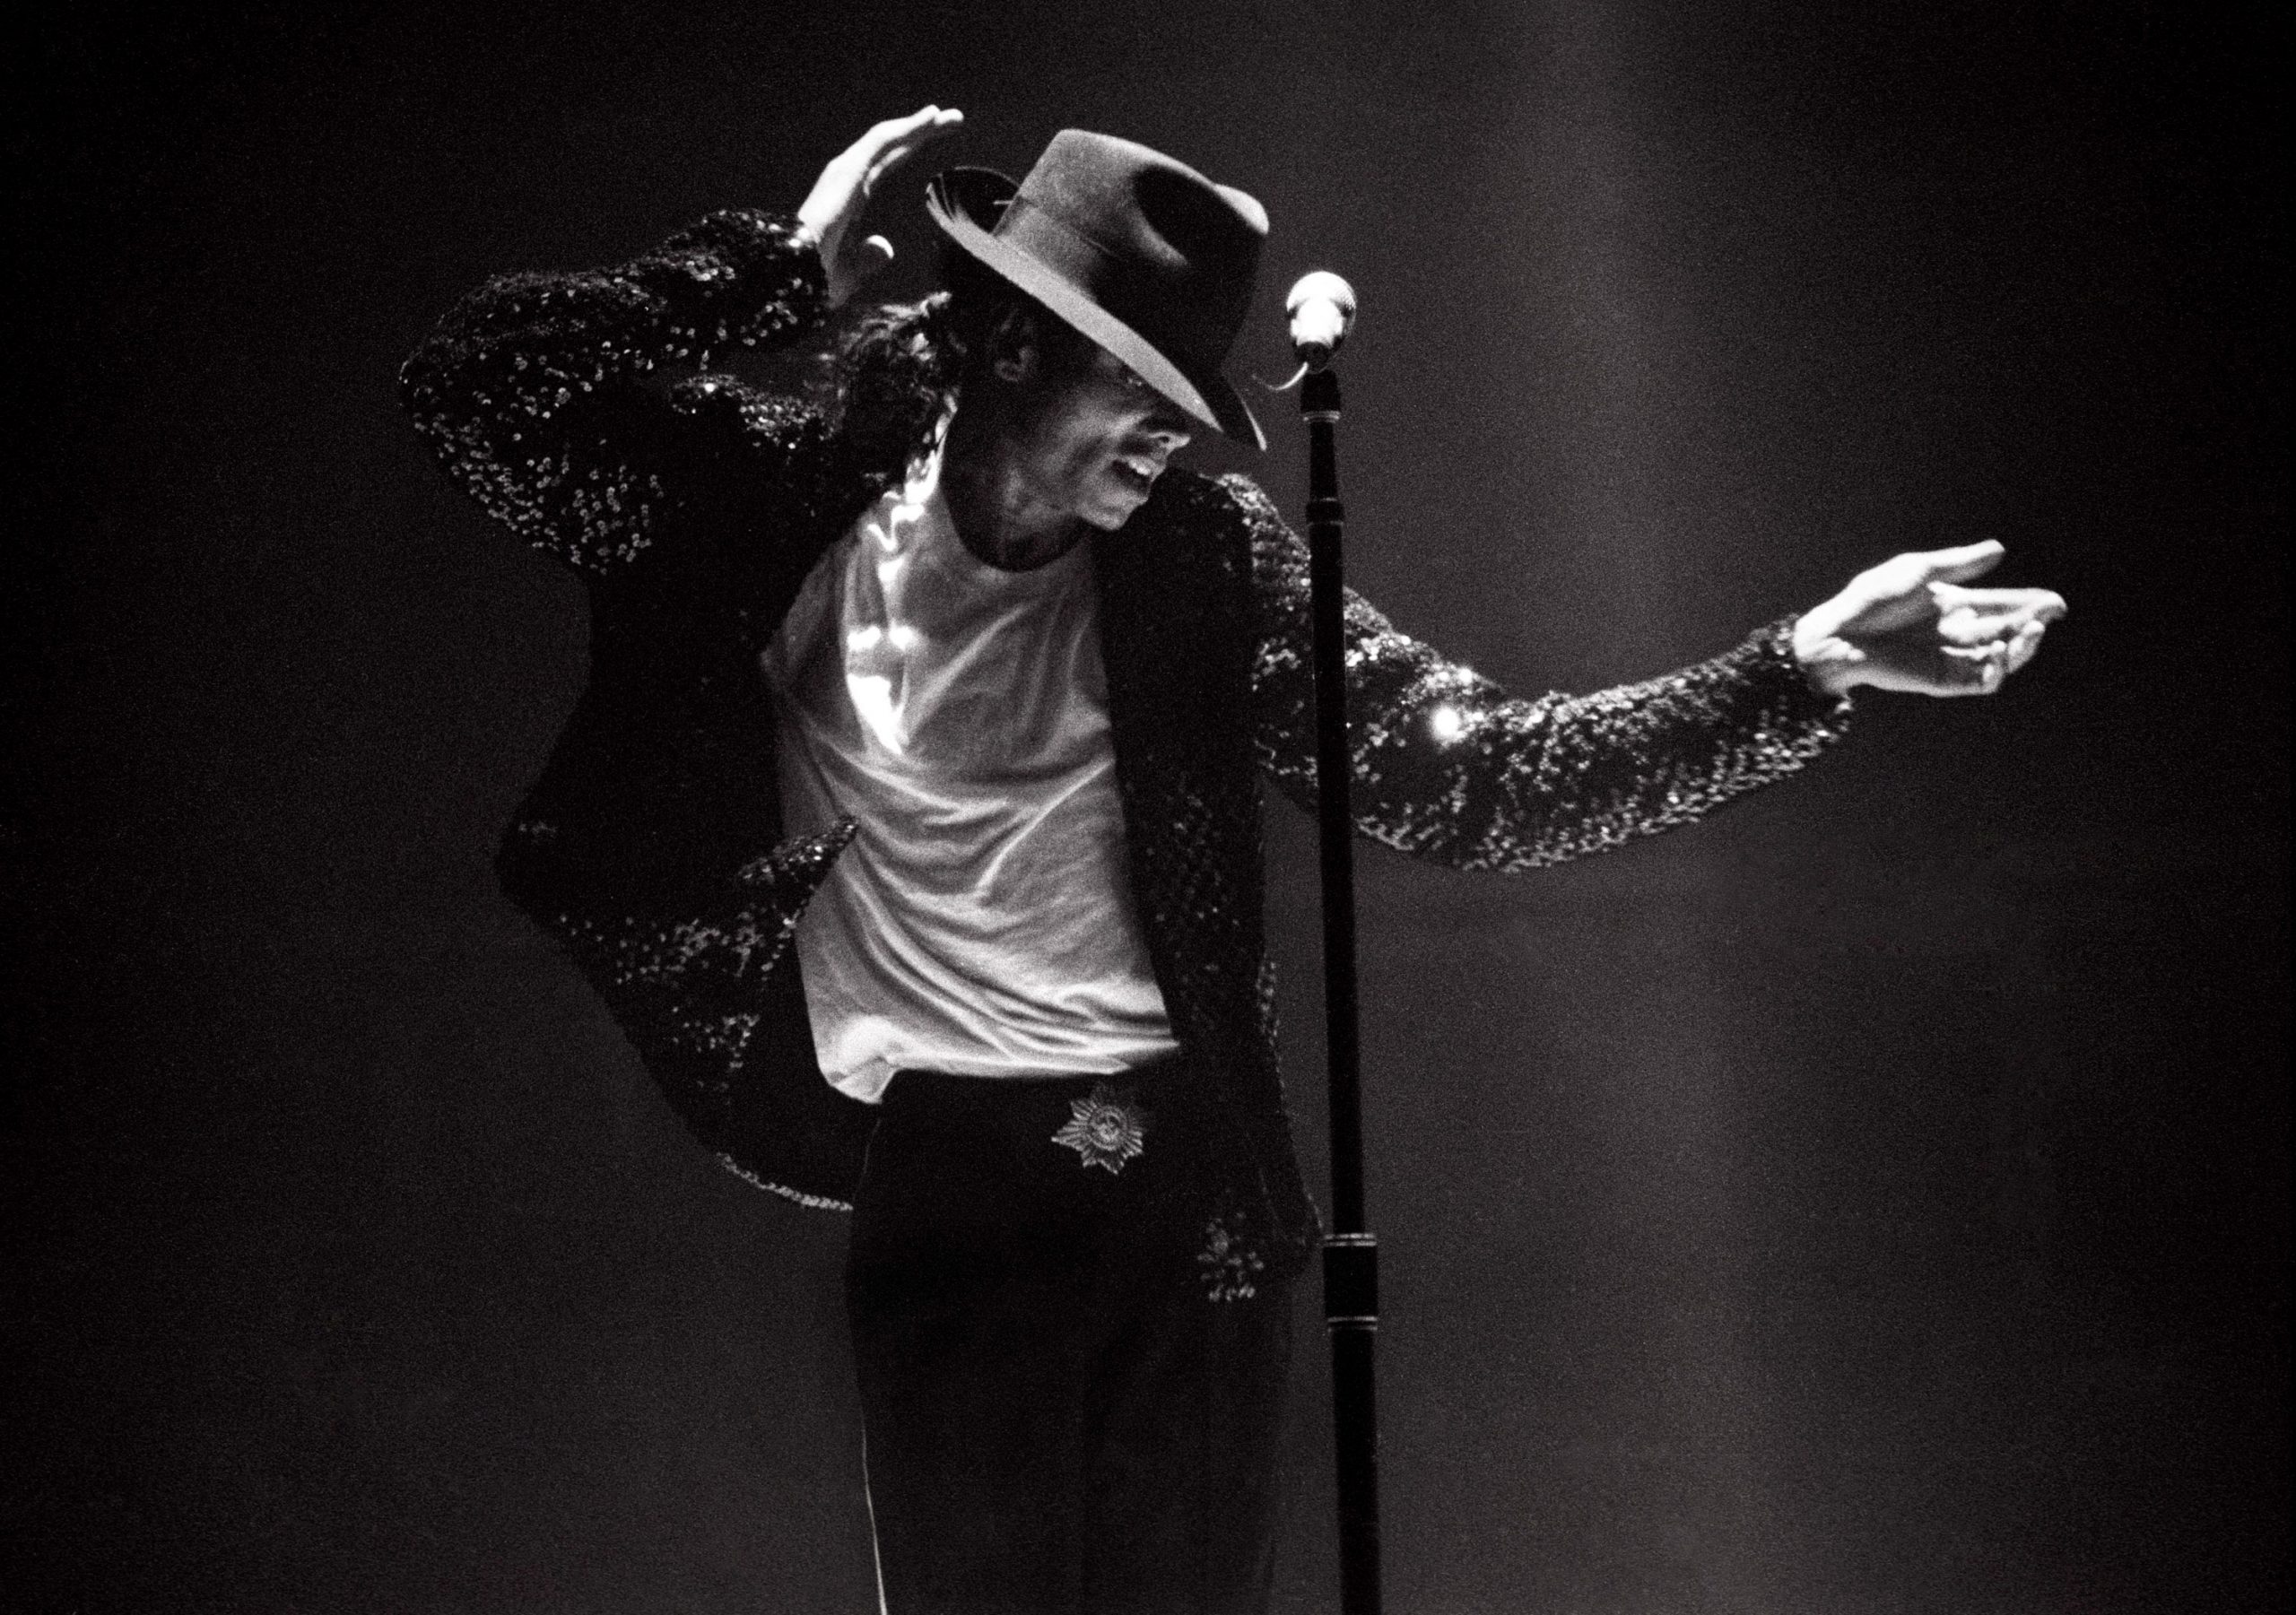 Michael Jackson with a microphone